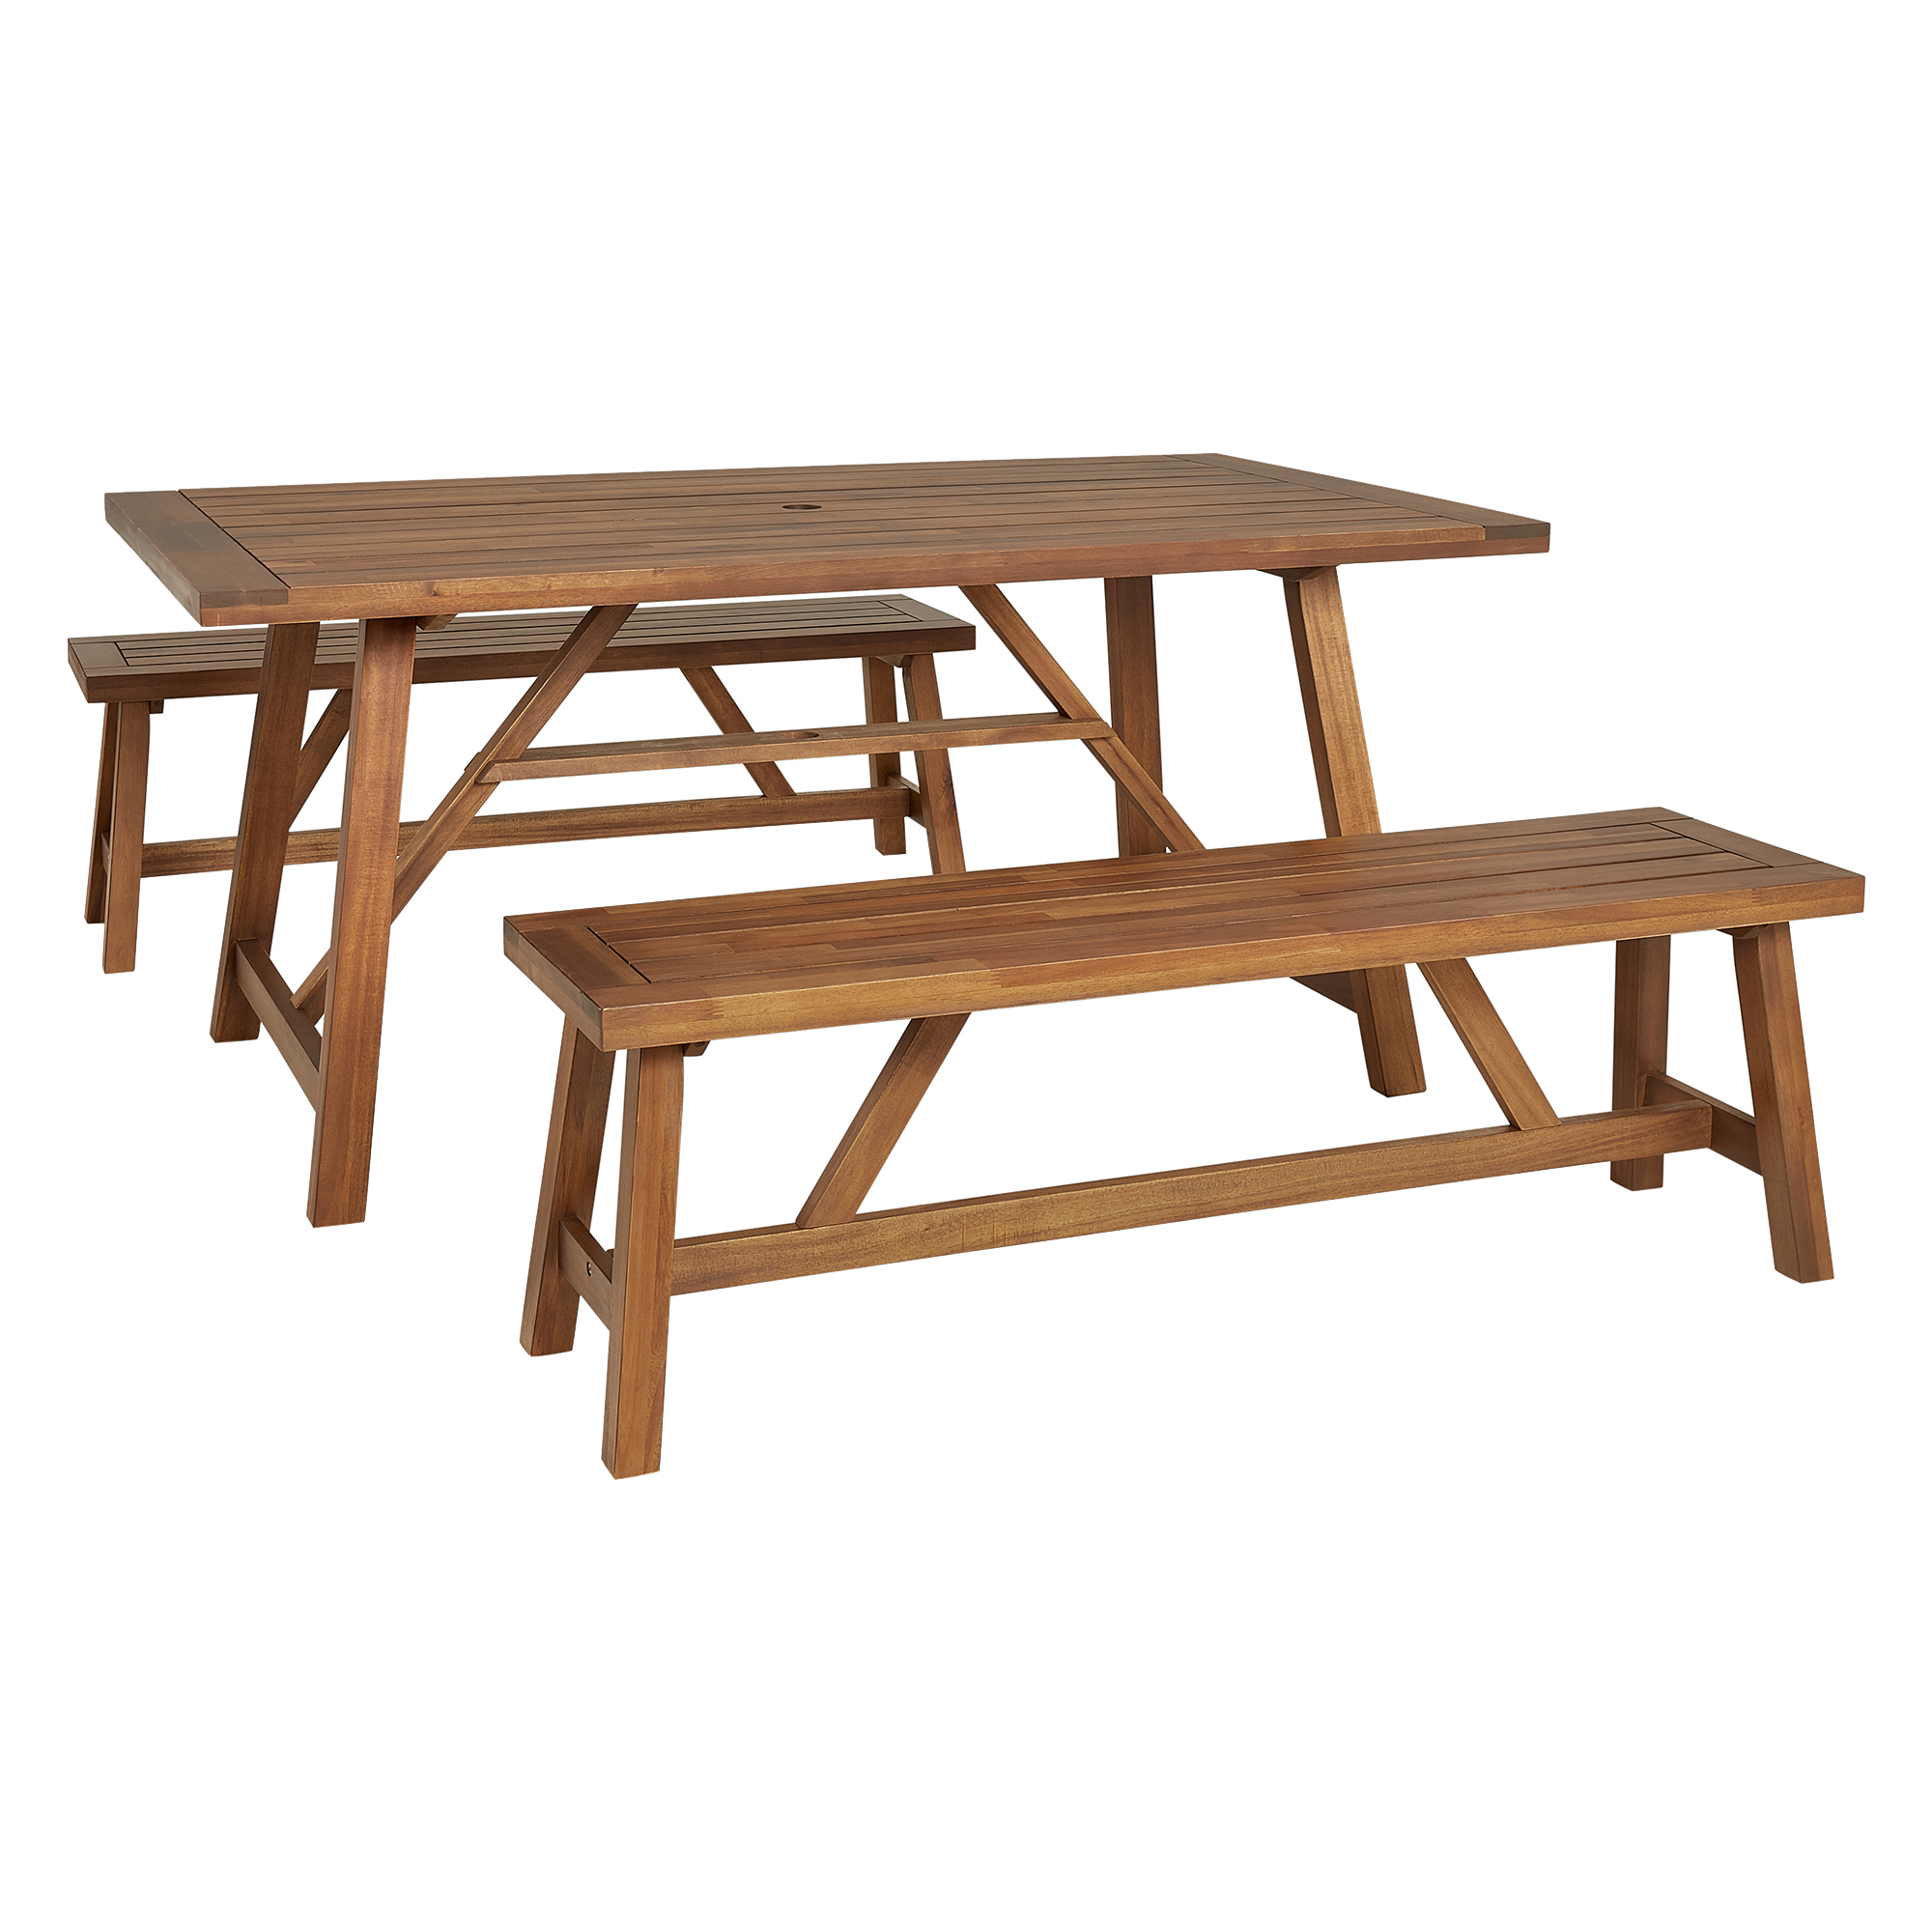 Temple Webster 4 Seater Natural Ranch, Wooden Outdoor Bench Set